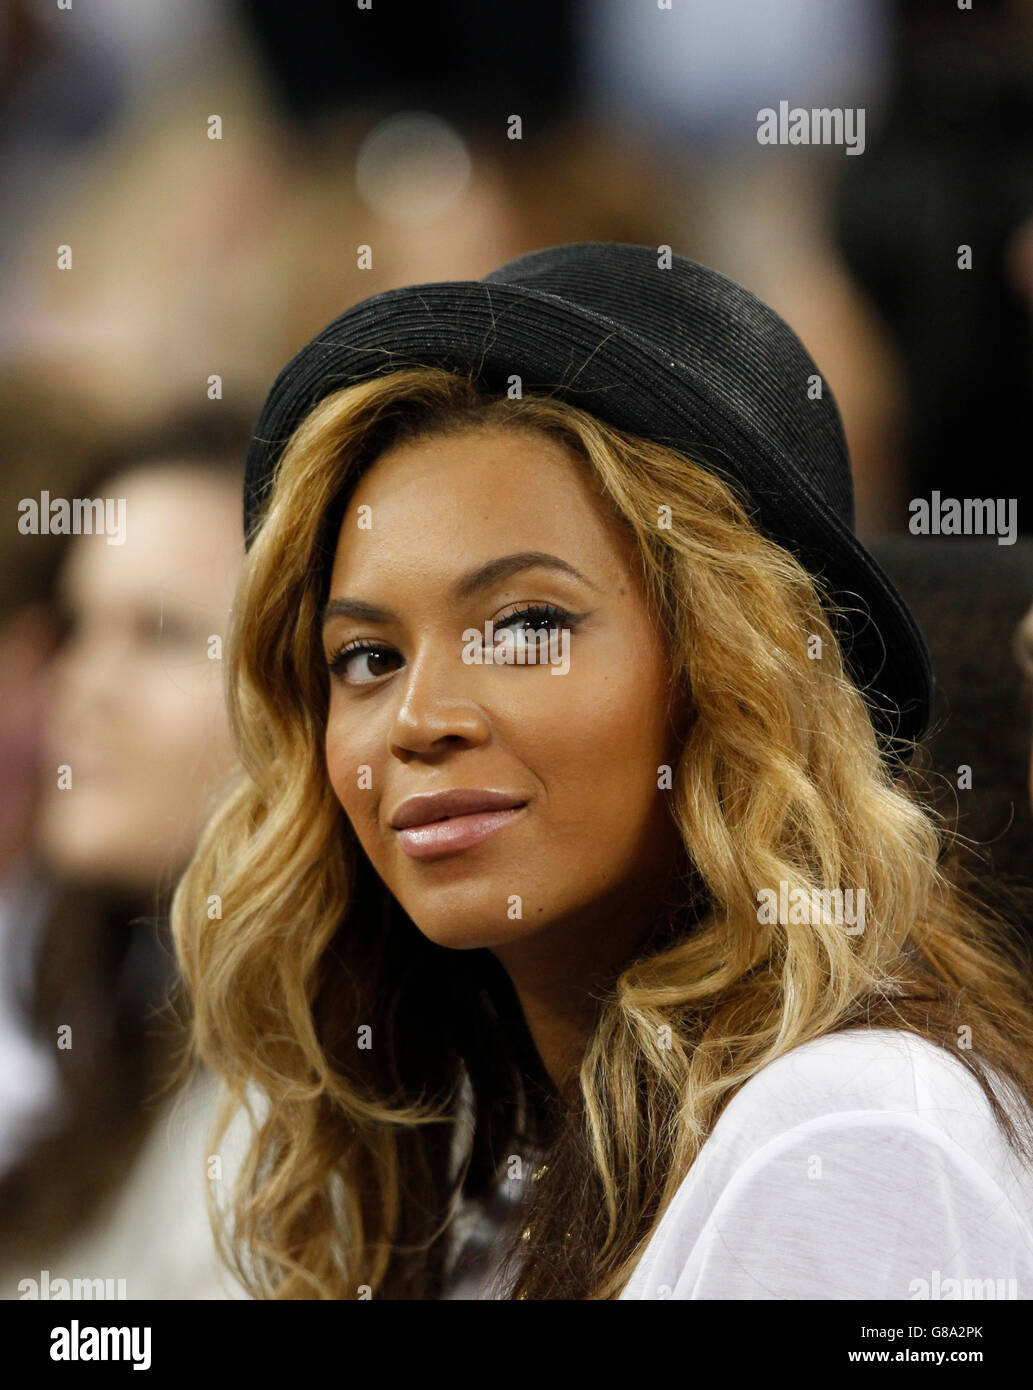 Pop star Beyonce as a spectator in the stands at the men's finals,  portrait, ITF Grand Slam tennis tournament, U.S. Open 2011 Stock Photo -  Alamy